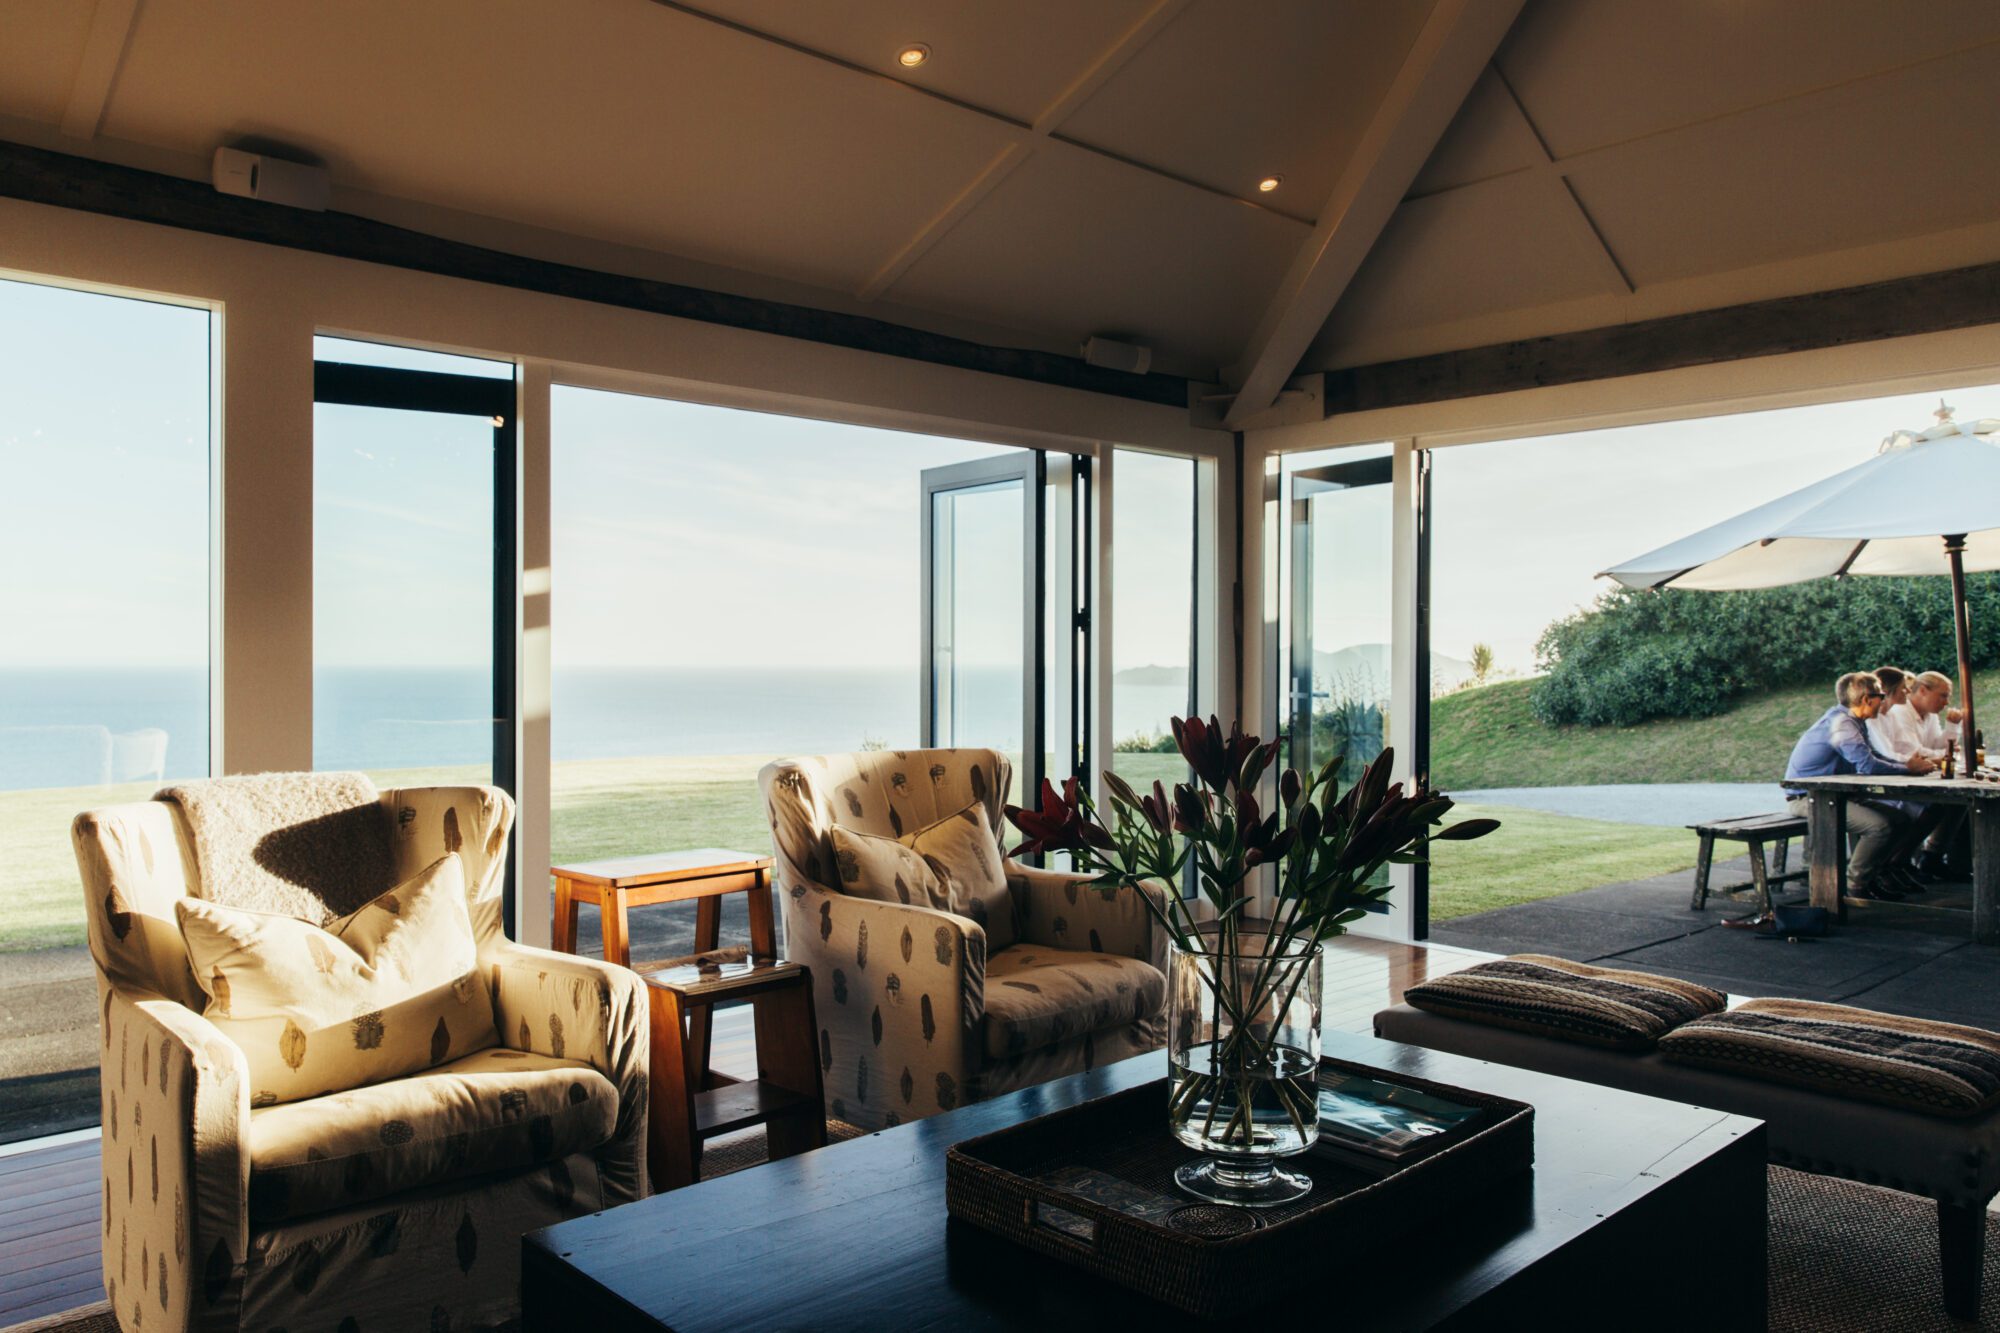 The Blackhouse boutique accommodation in New Zealand